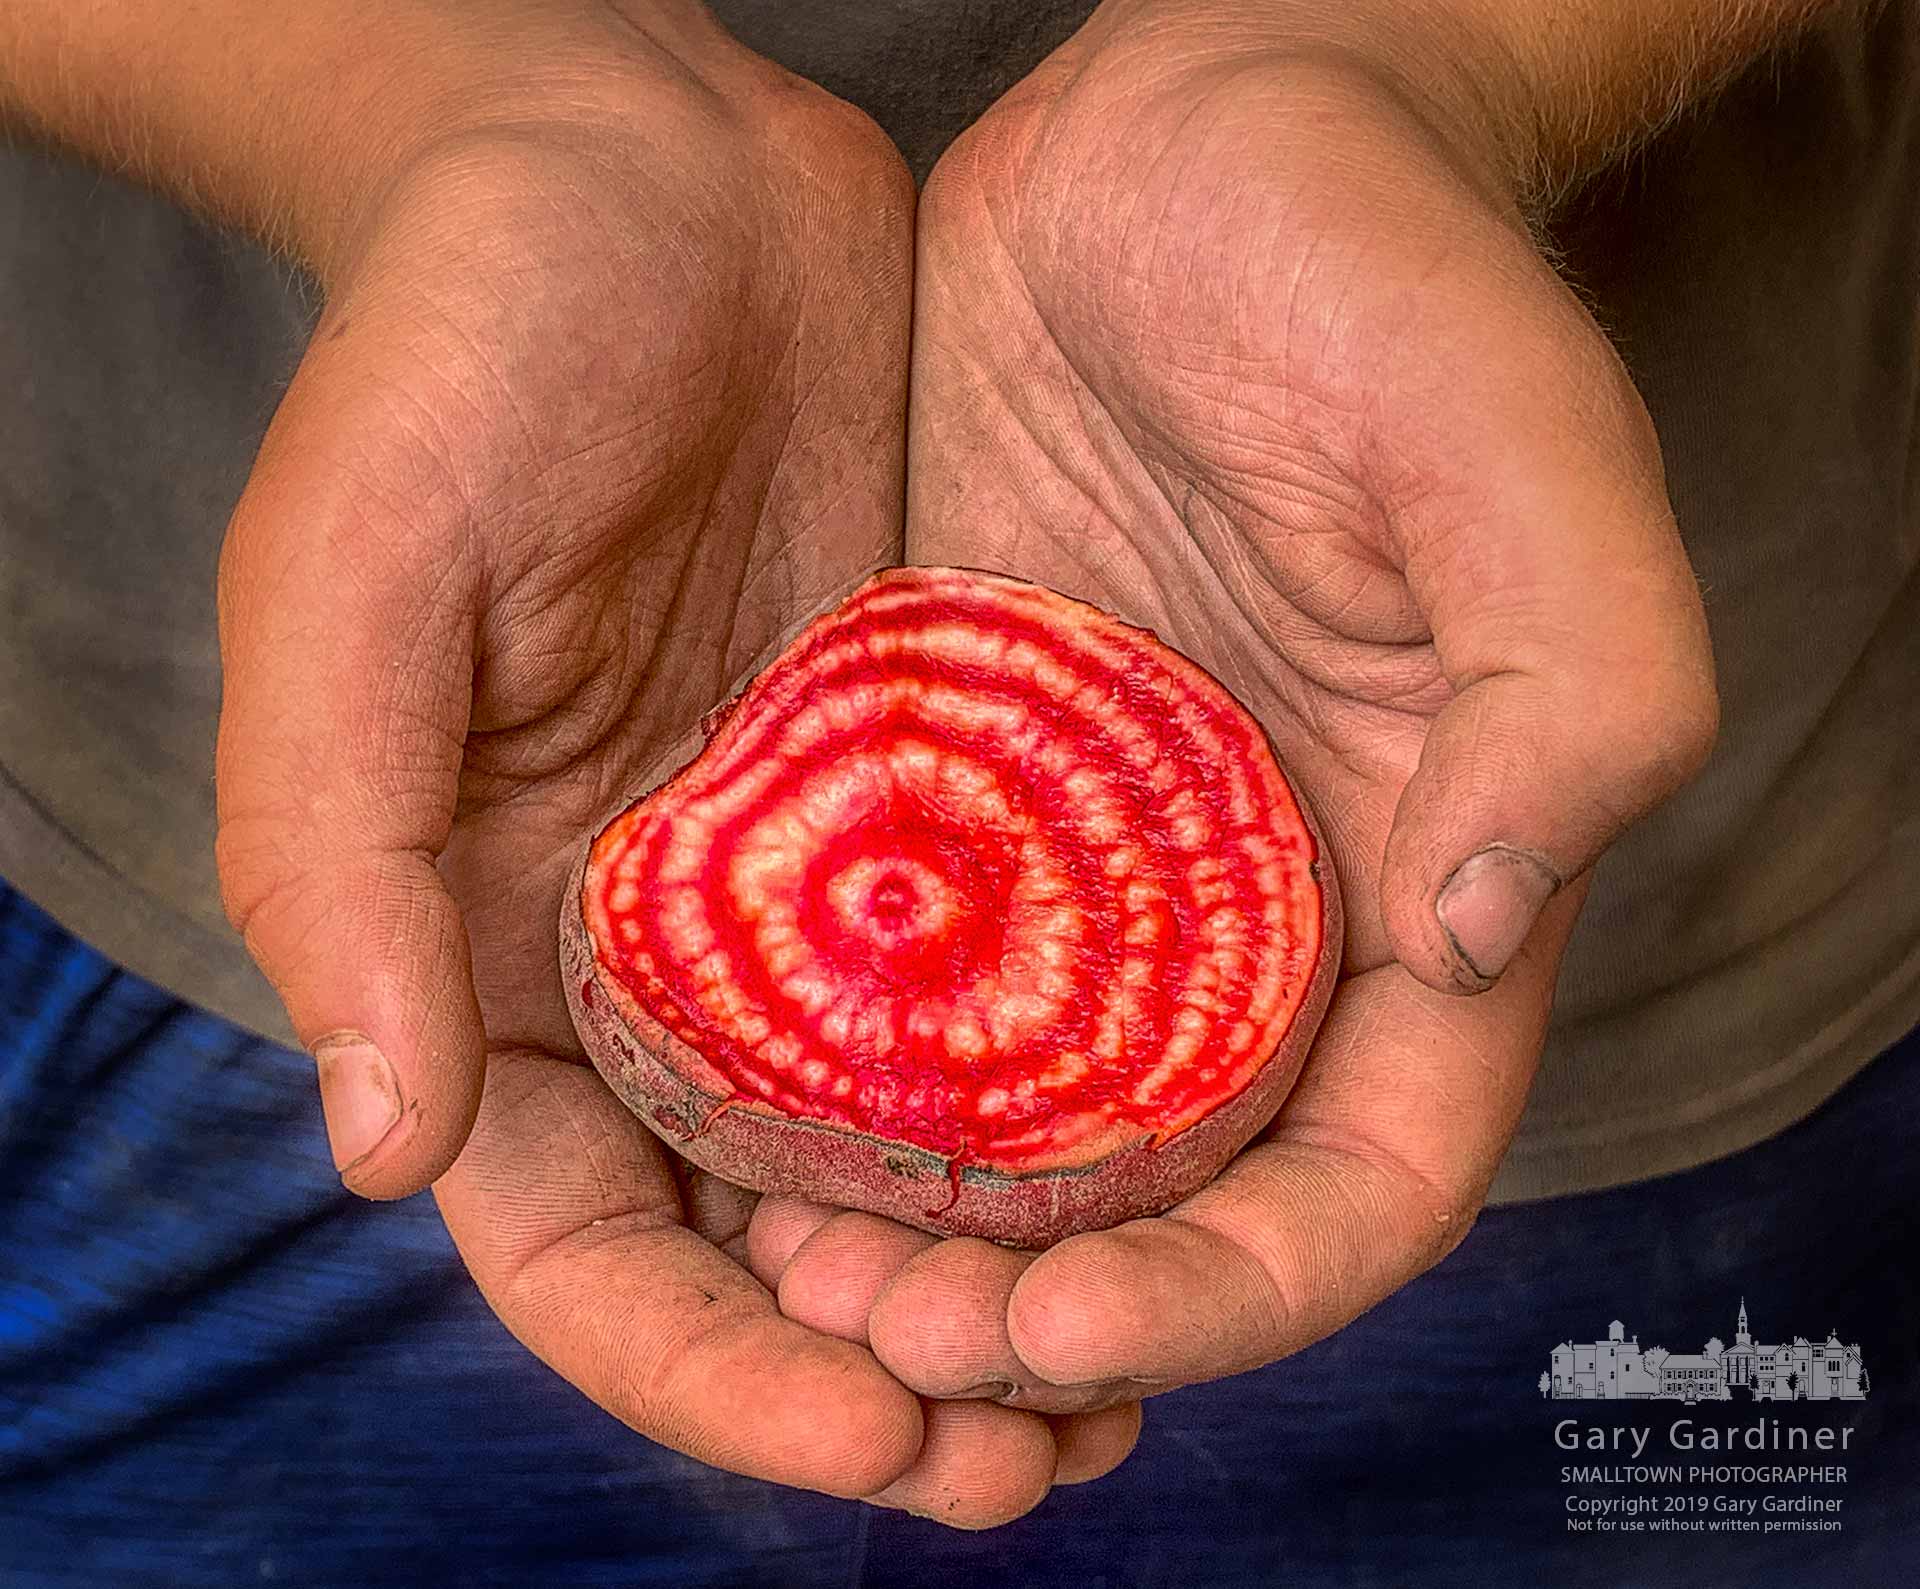 A farmhand holds a red and white beet sliced open for display at the Wednesday Uptown Westerville Farmers Market. My Final Photo for July 10, 2019.